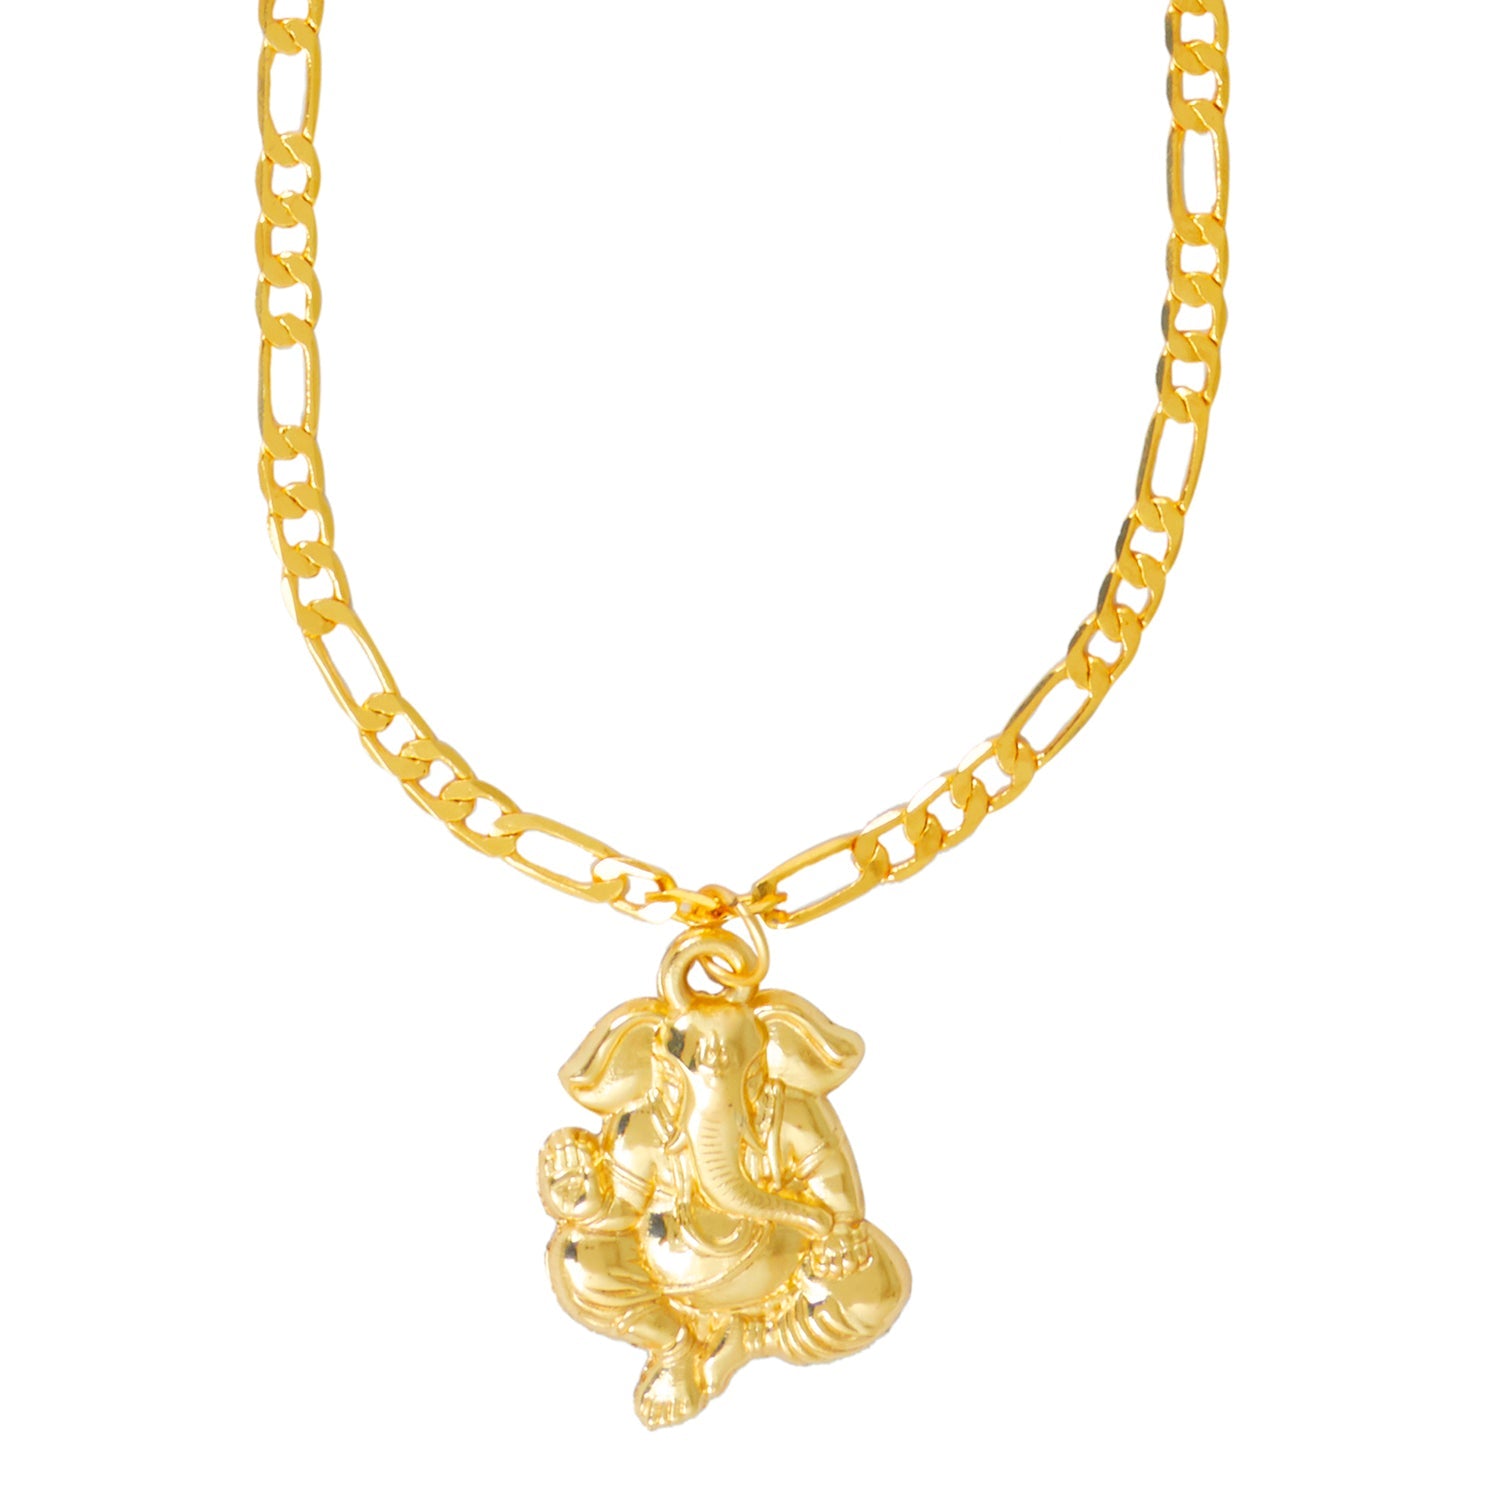 24k-micro-gold-lord-ganesha-pendant-with-designer-gold-chain-necklace